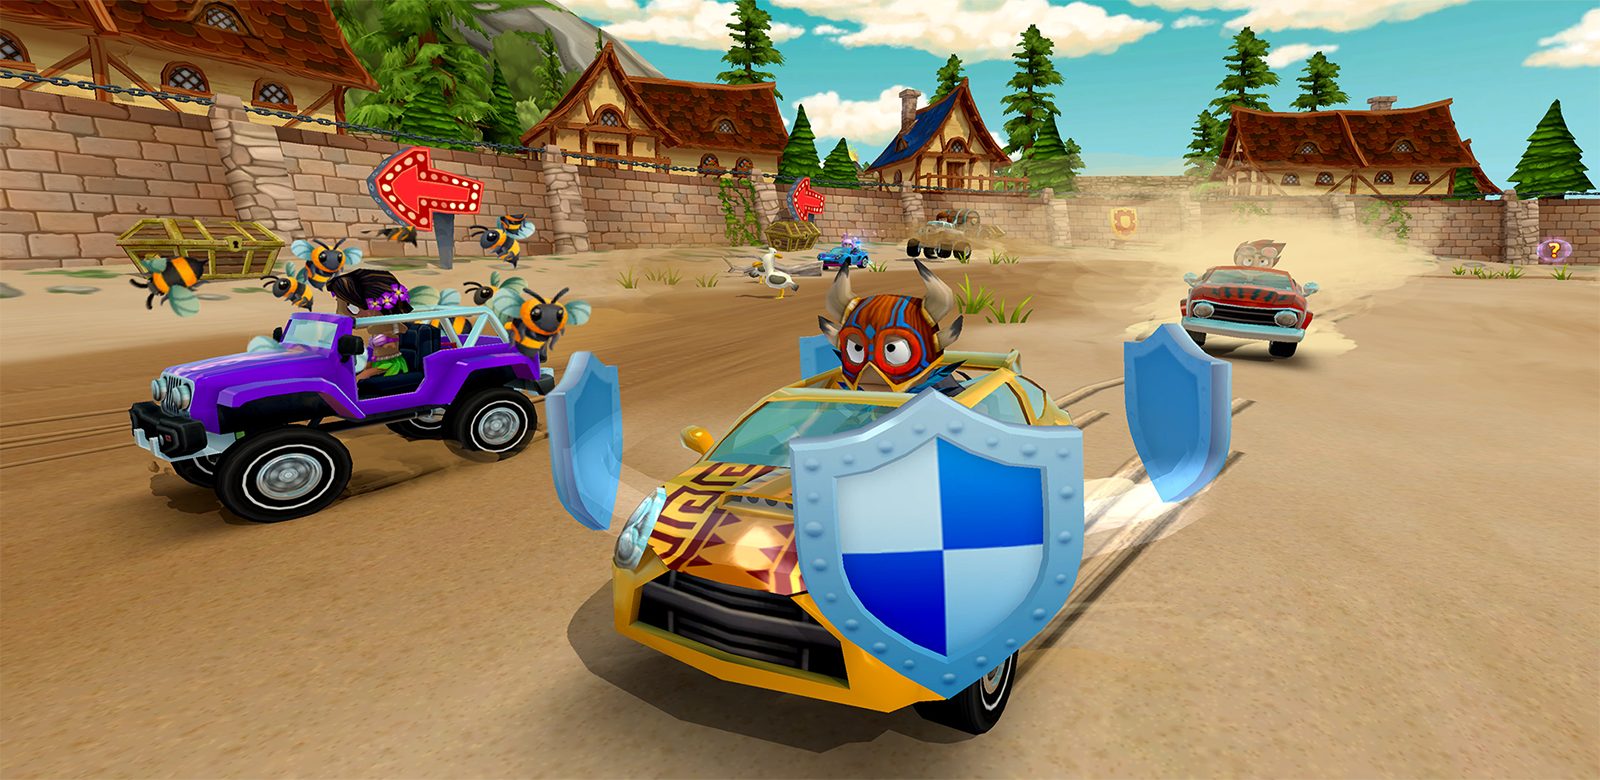 Beach Buggy Racing 2 Mod Apk 1.6.5 (Unlimited Money) Free Download